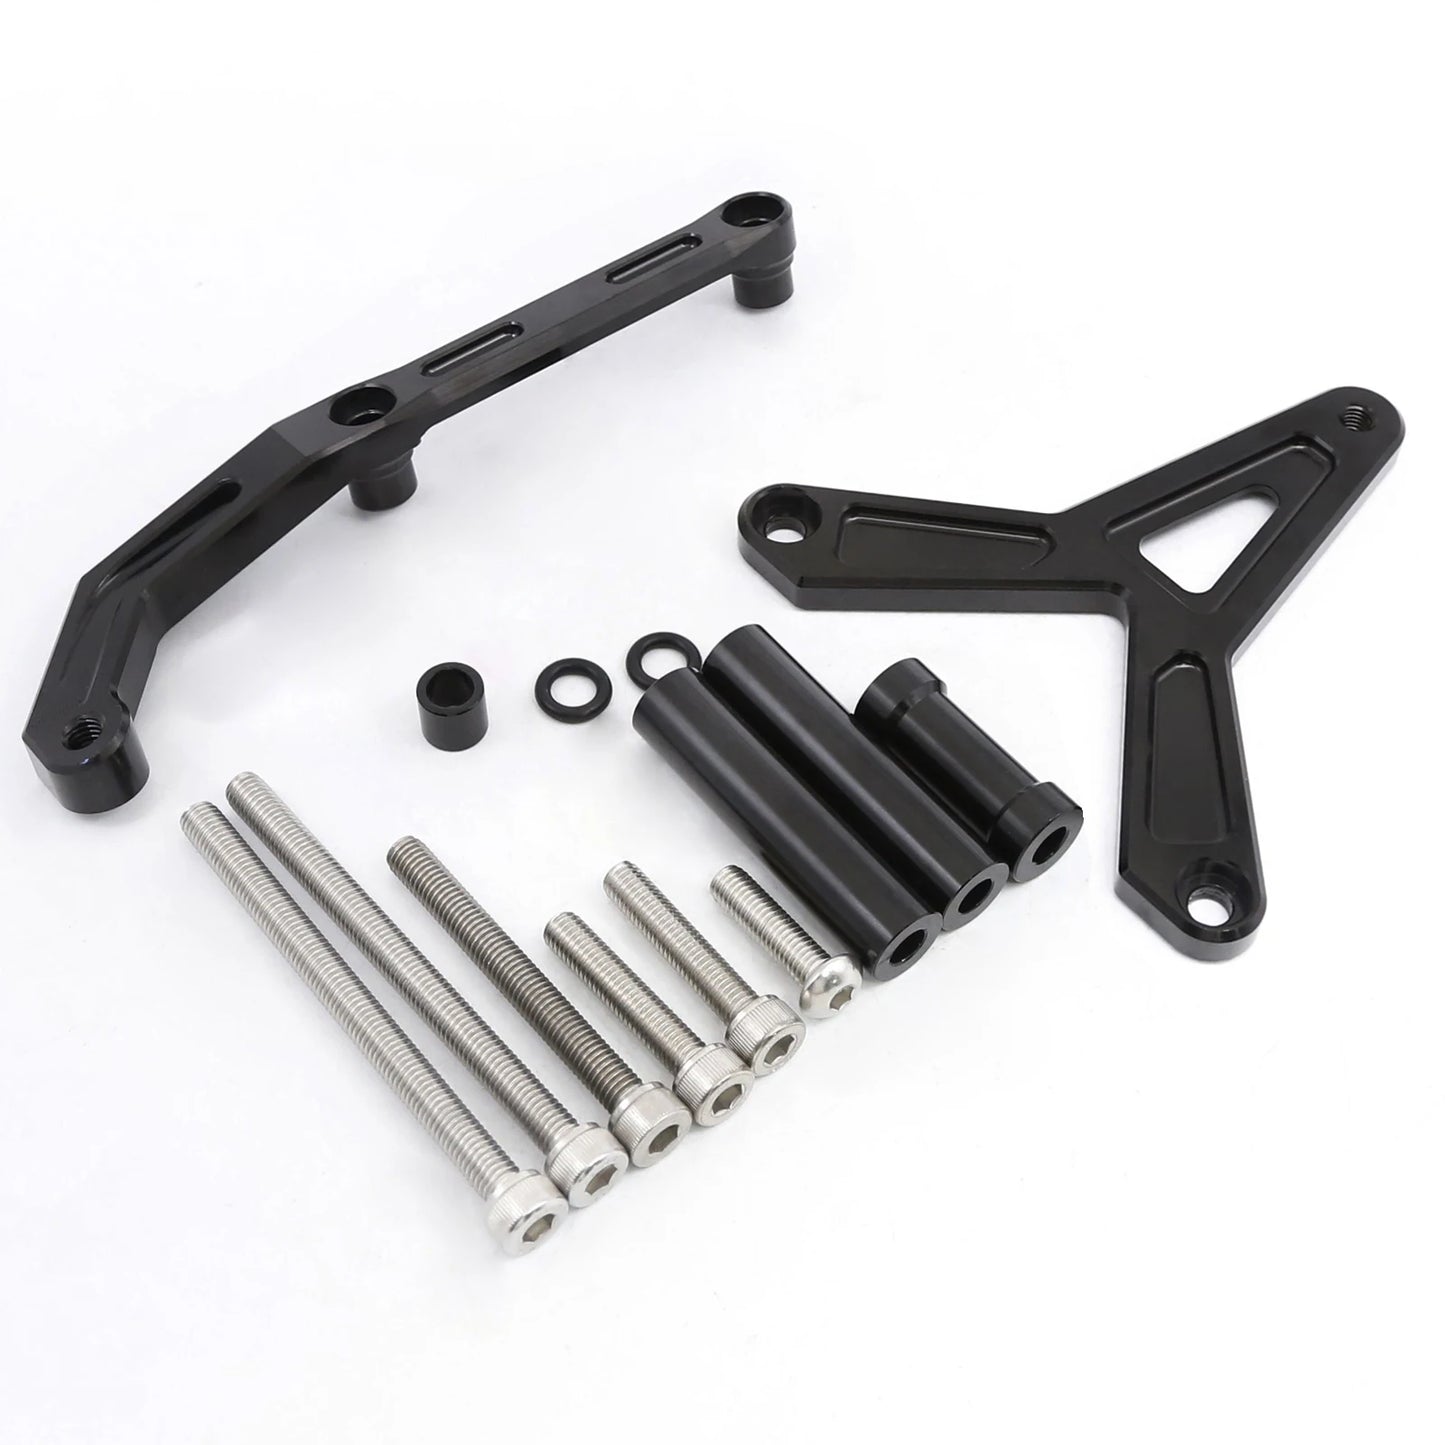 For YAMAHA Tracer 900 GT 2021 2022 2023 CNC Aluminum Carbon Motorcycle Steering Damper Stabilizer Bracket Mounting Support Kit